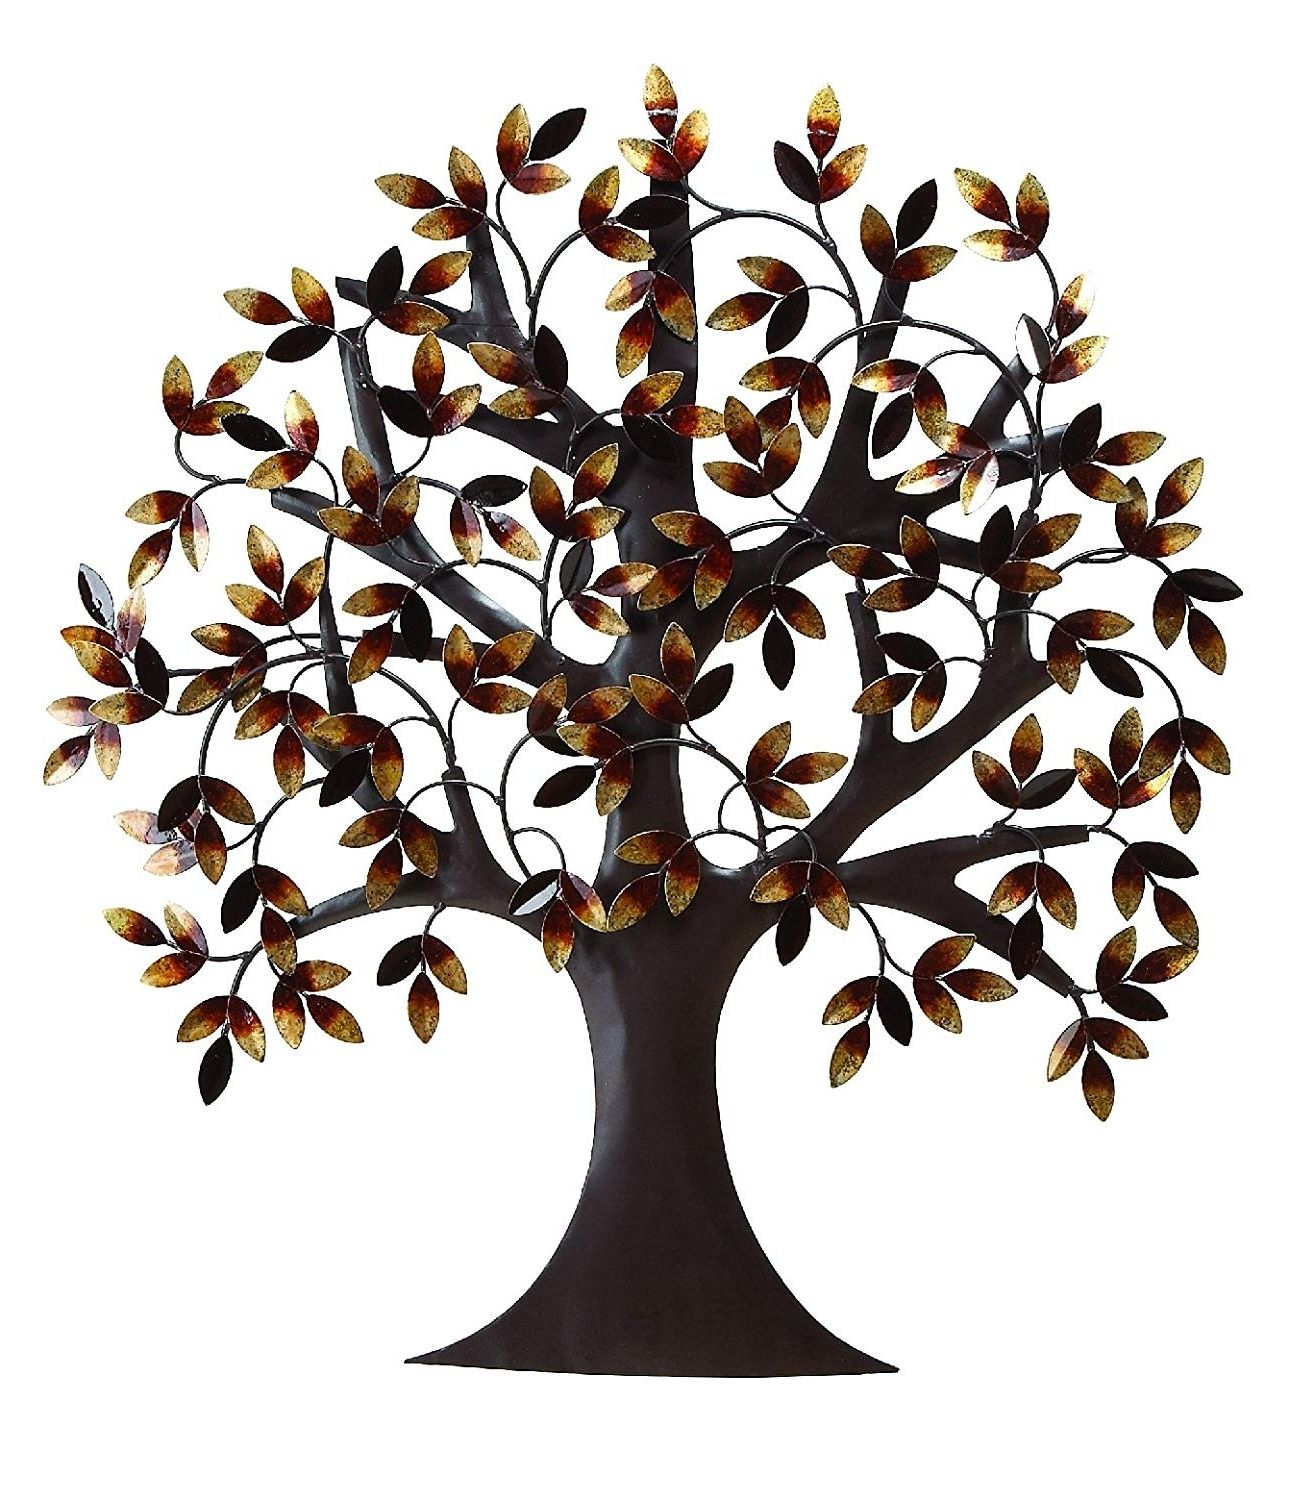 Amazon: Deco 79 13862 Metal Tree Wall Decor 32"h, 31"w: Home Pertaining To Recent Tree Of Life Metal Wall Art (View 4 of 15)